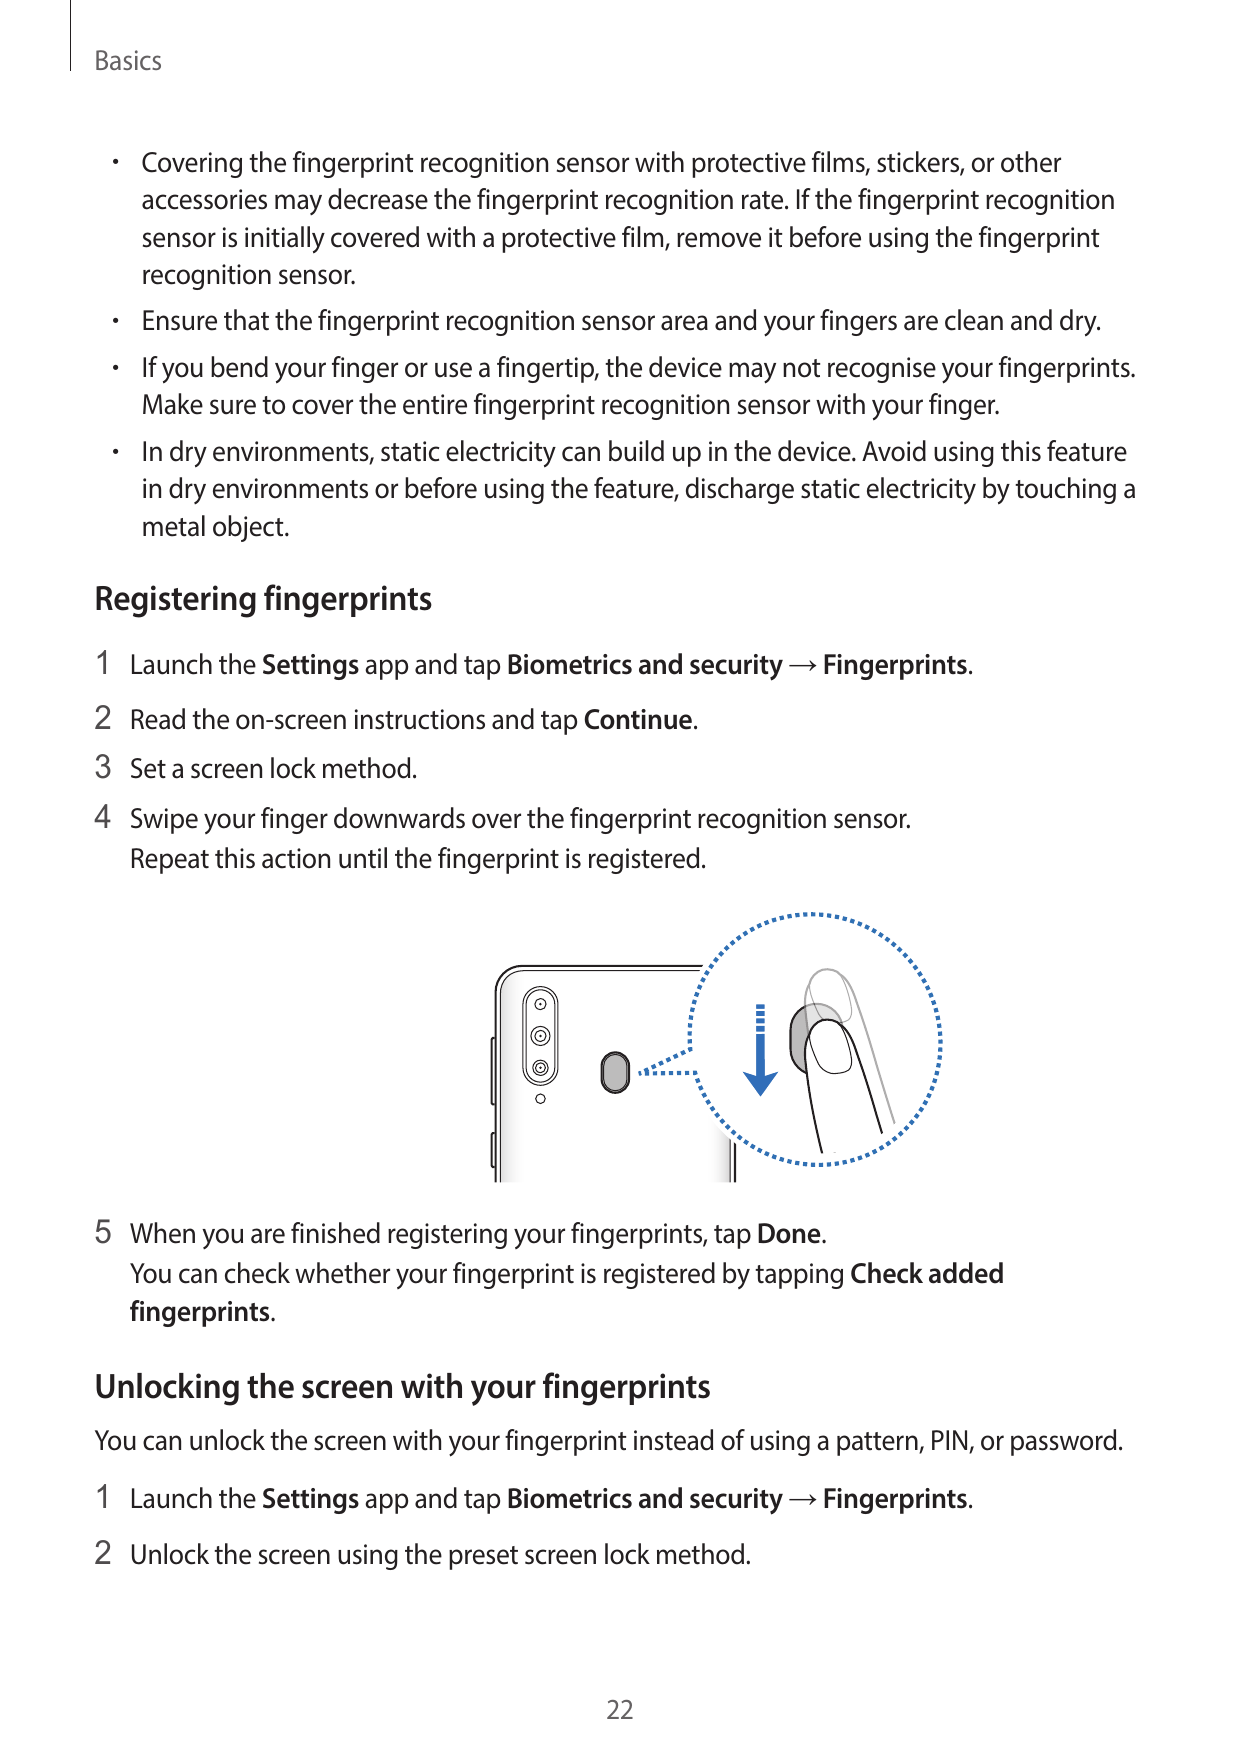 Basics• Covering the fingerprint recognition sensor with protective films, stickers, or otheraccessories may decrease the finger